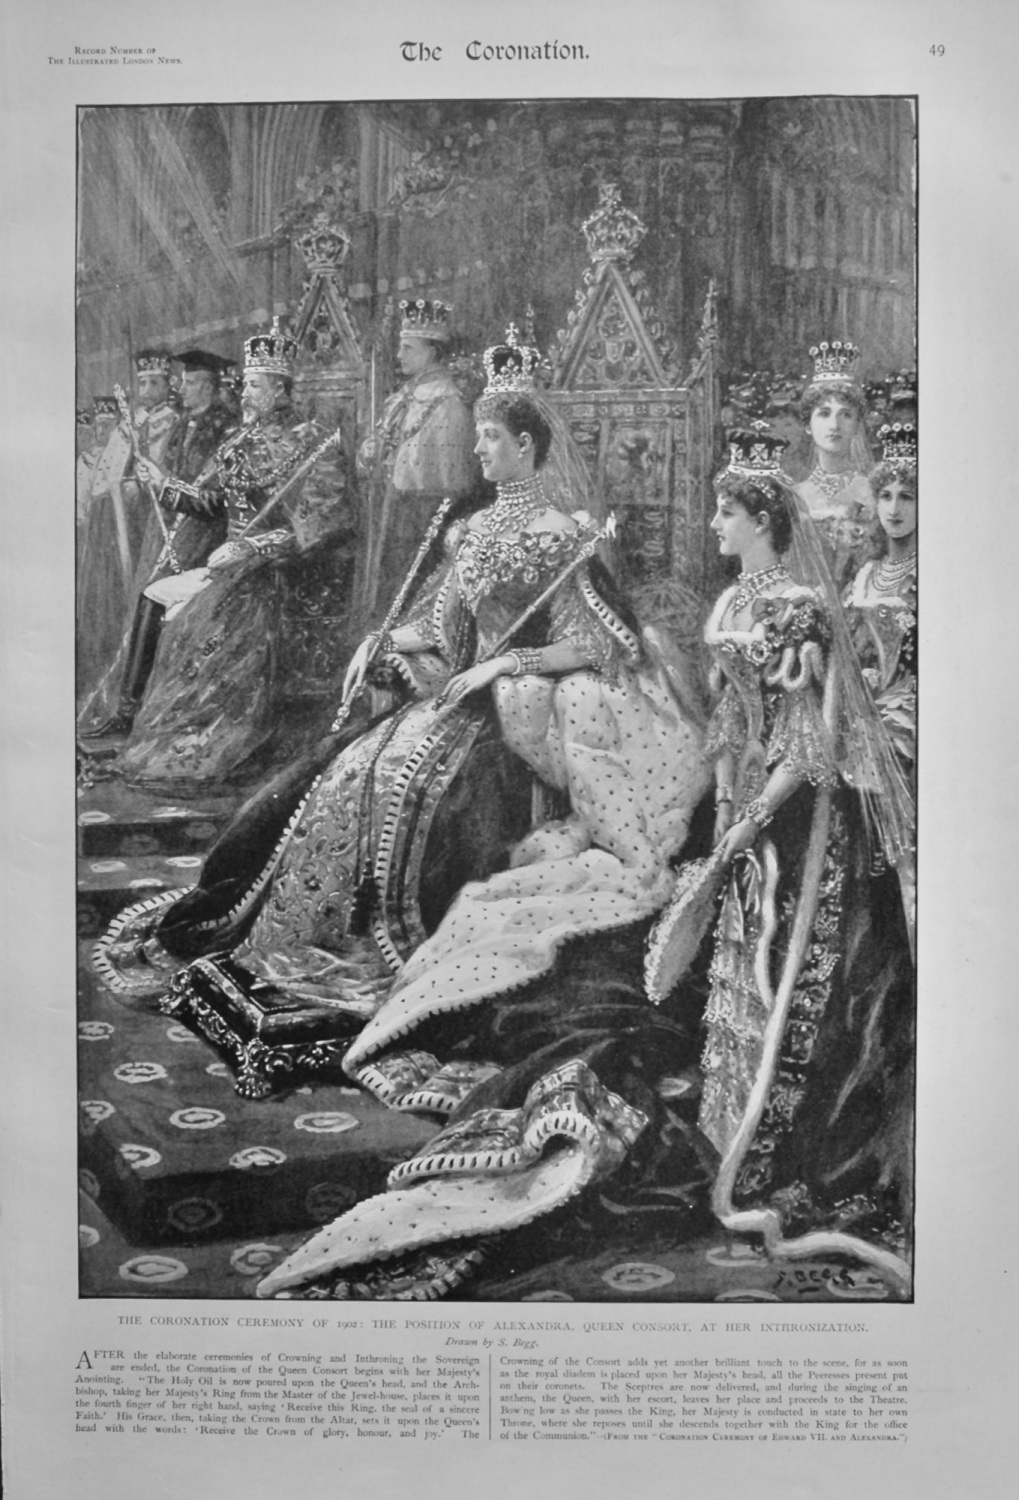 The Coronation Ceremony of 1902 : The Position of Alexandra, Queen Consort,